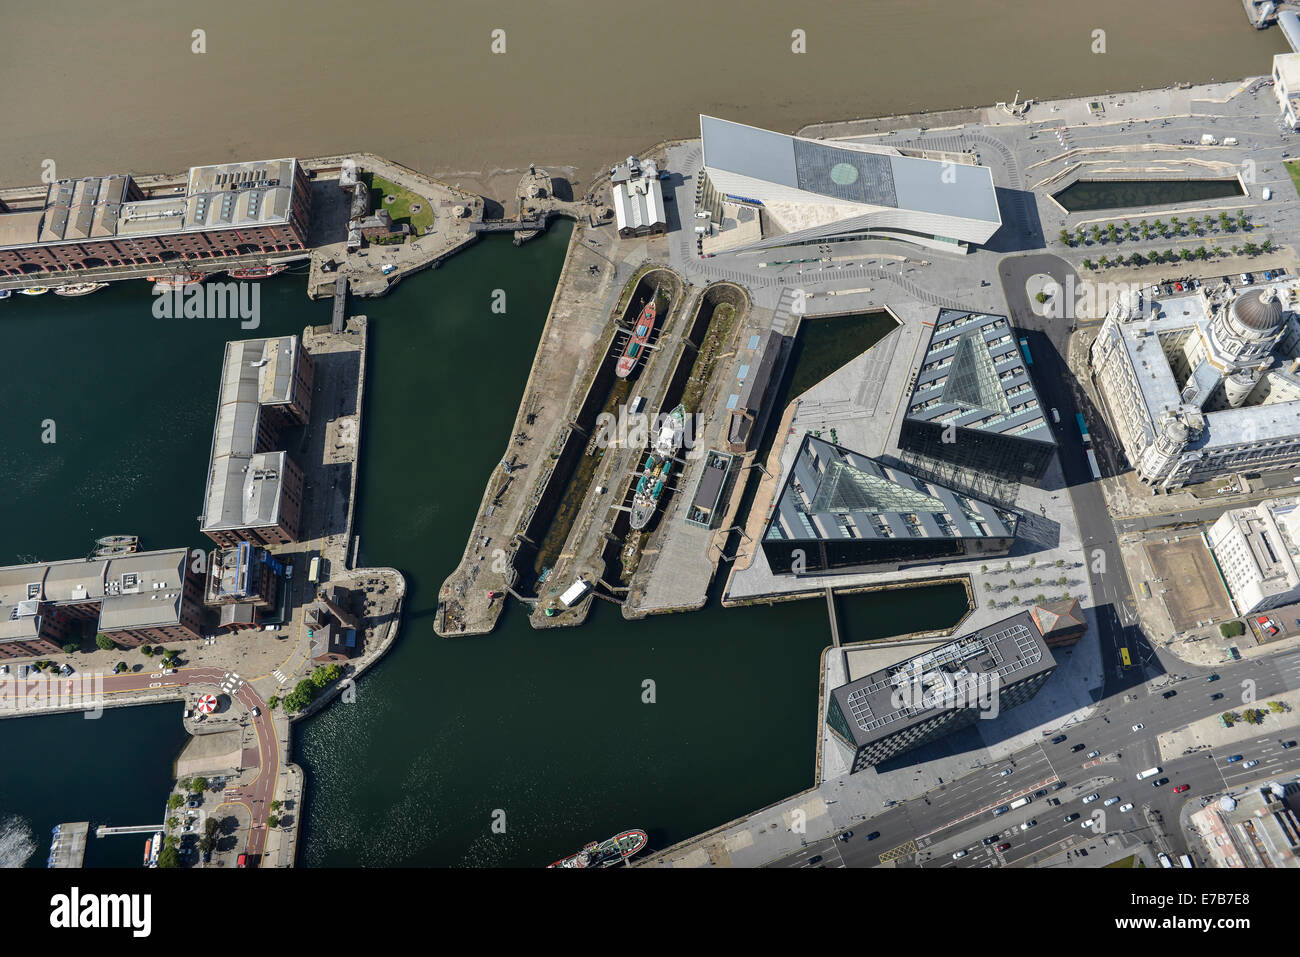 An aerial view of the area around the Museum of Liverpool and Albert Dock. Stock Photo